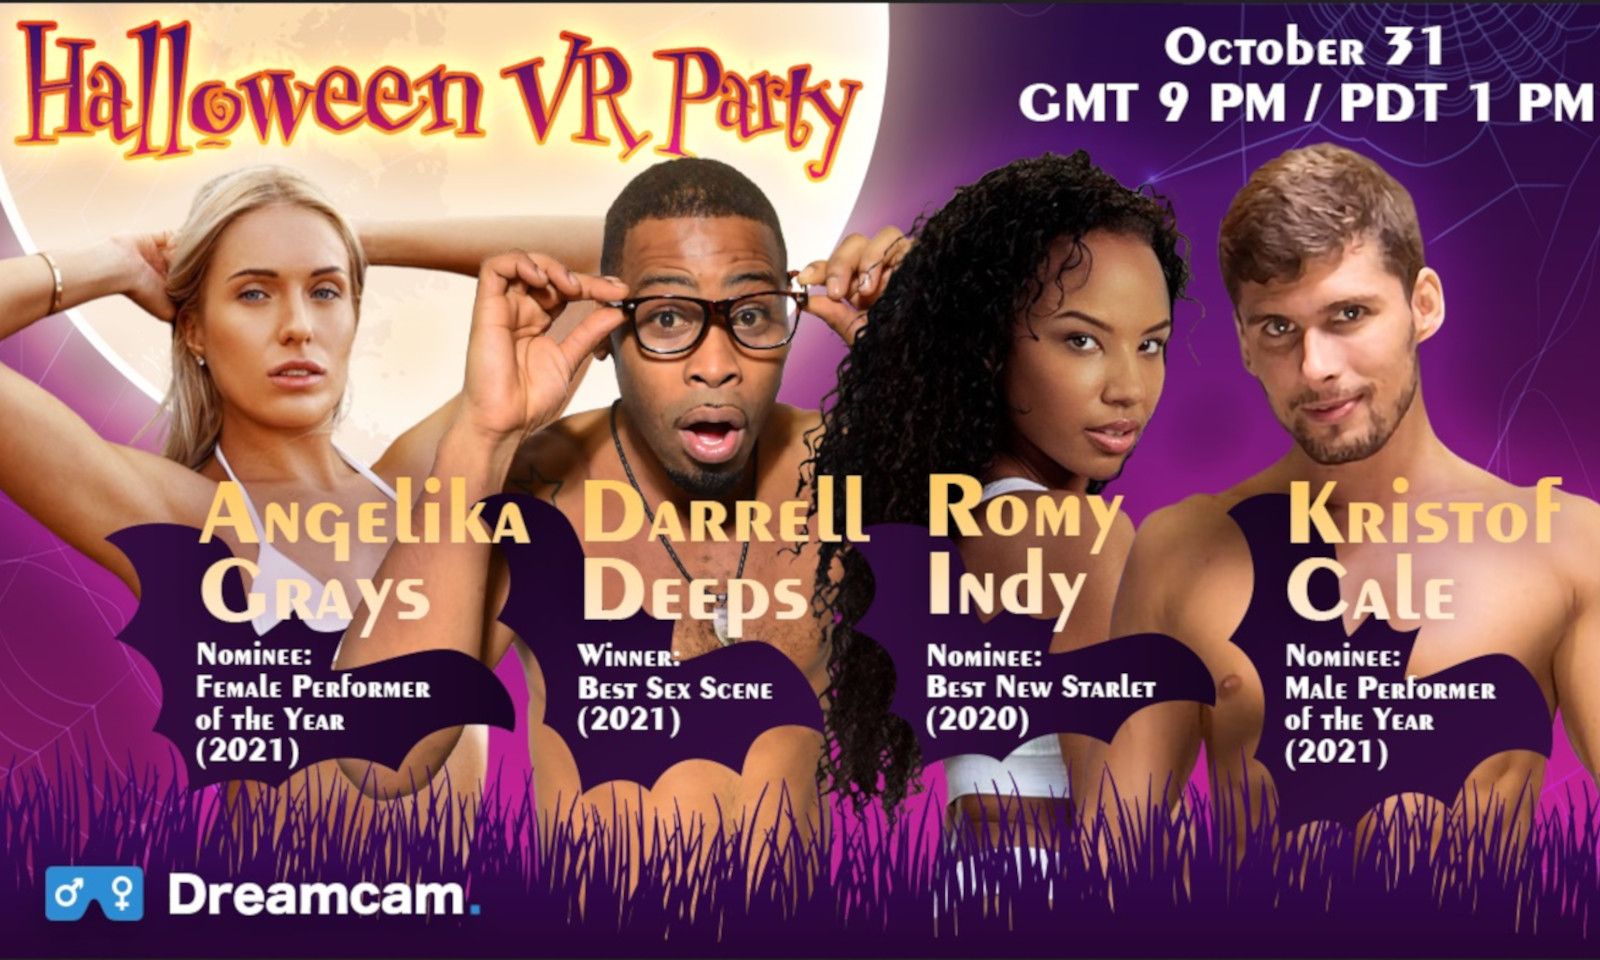 Dreamcam Teams With Stripchat and Others for Halloween VR Party